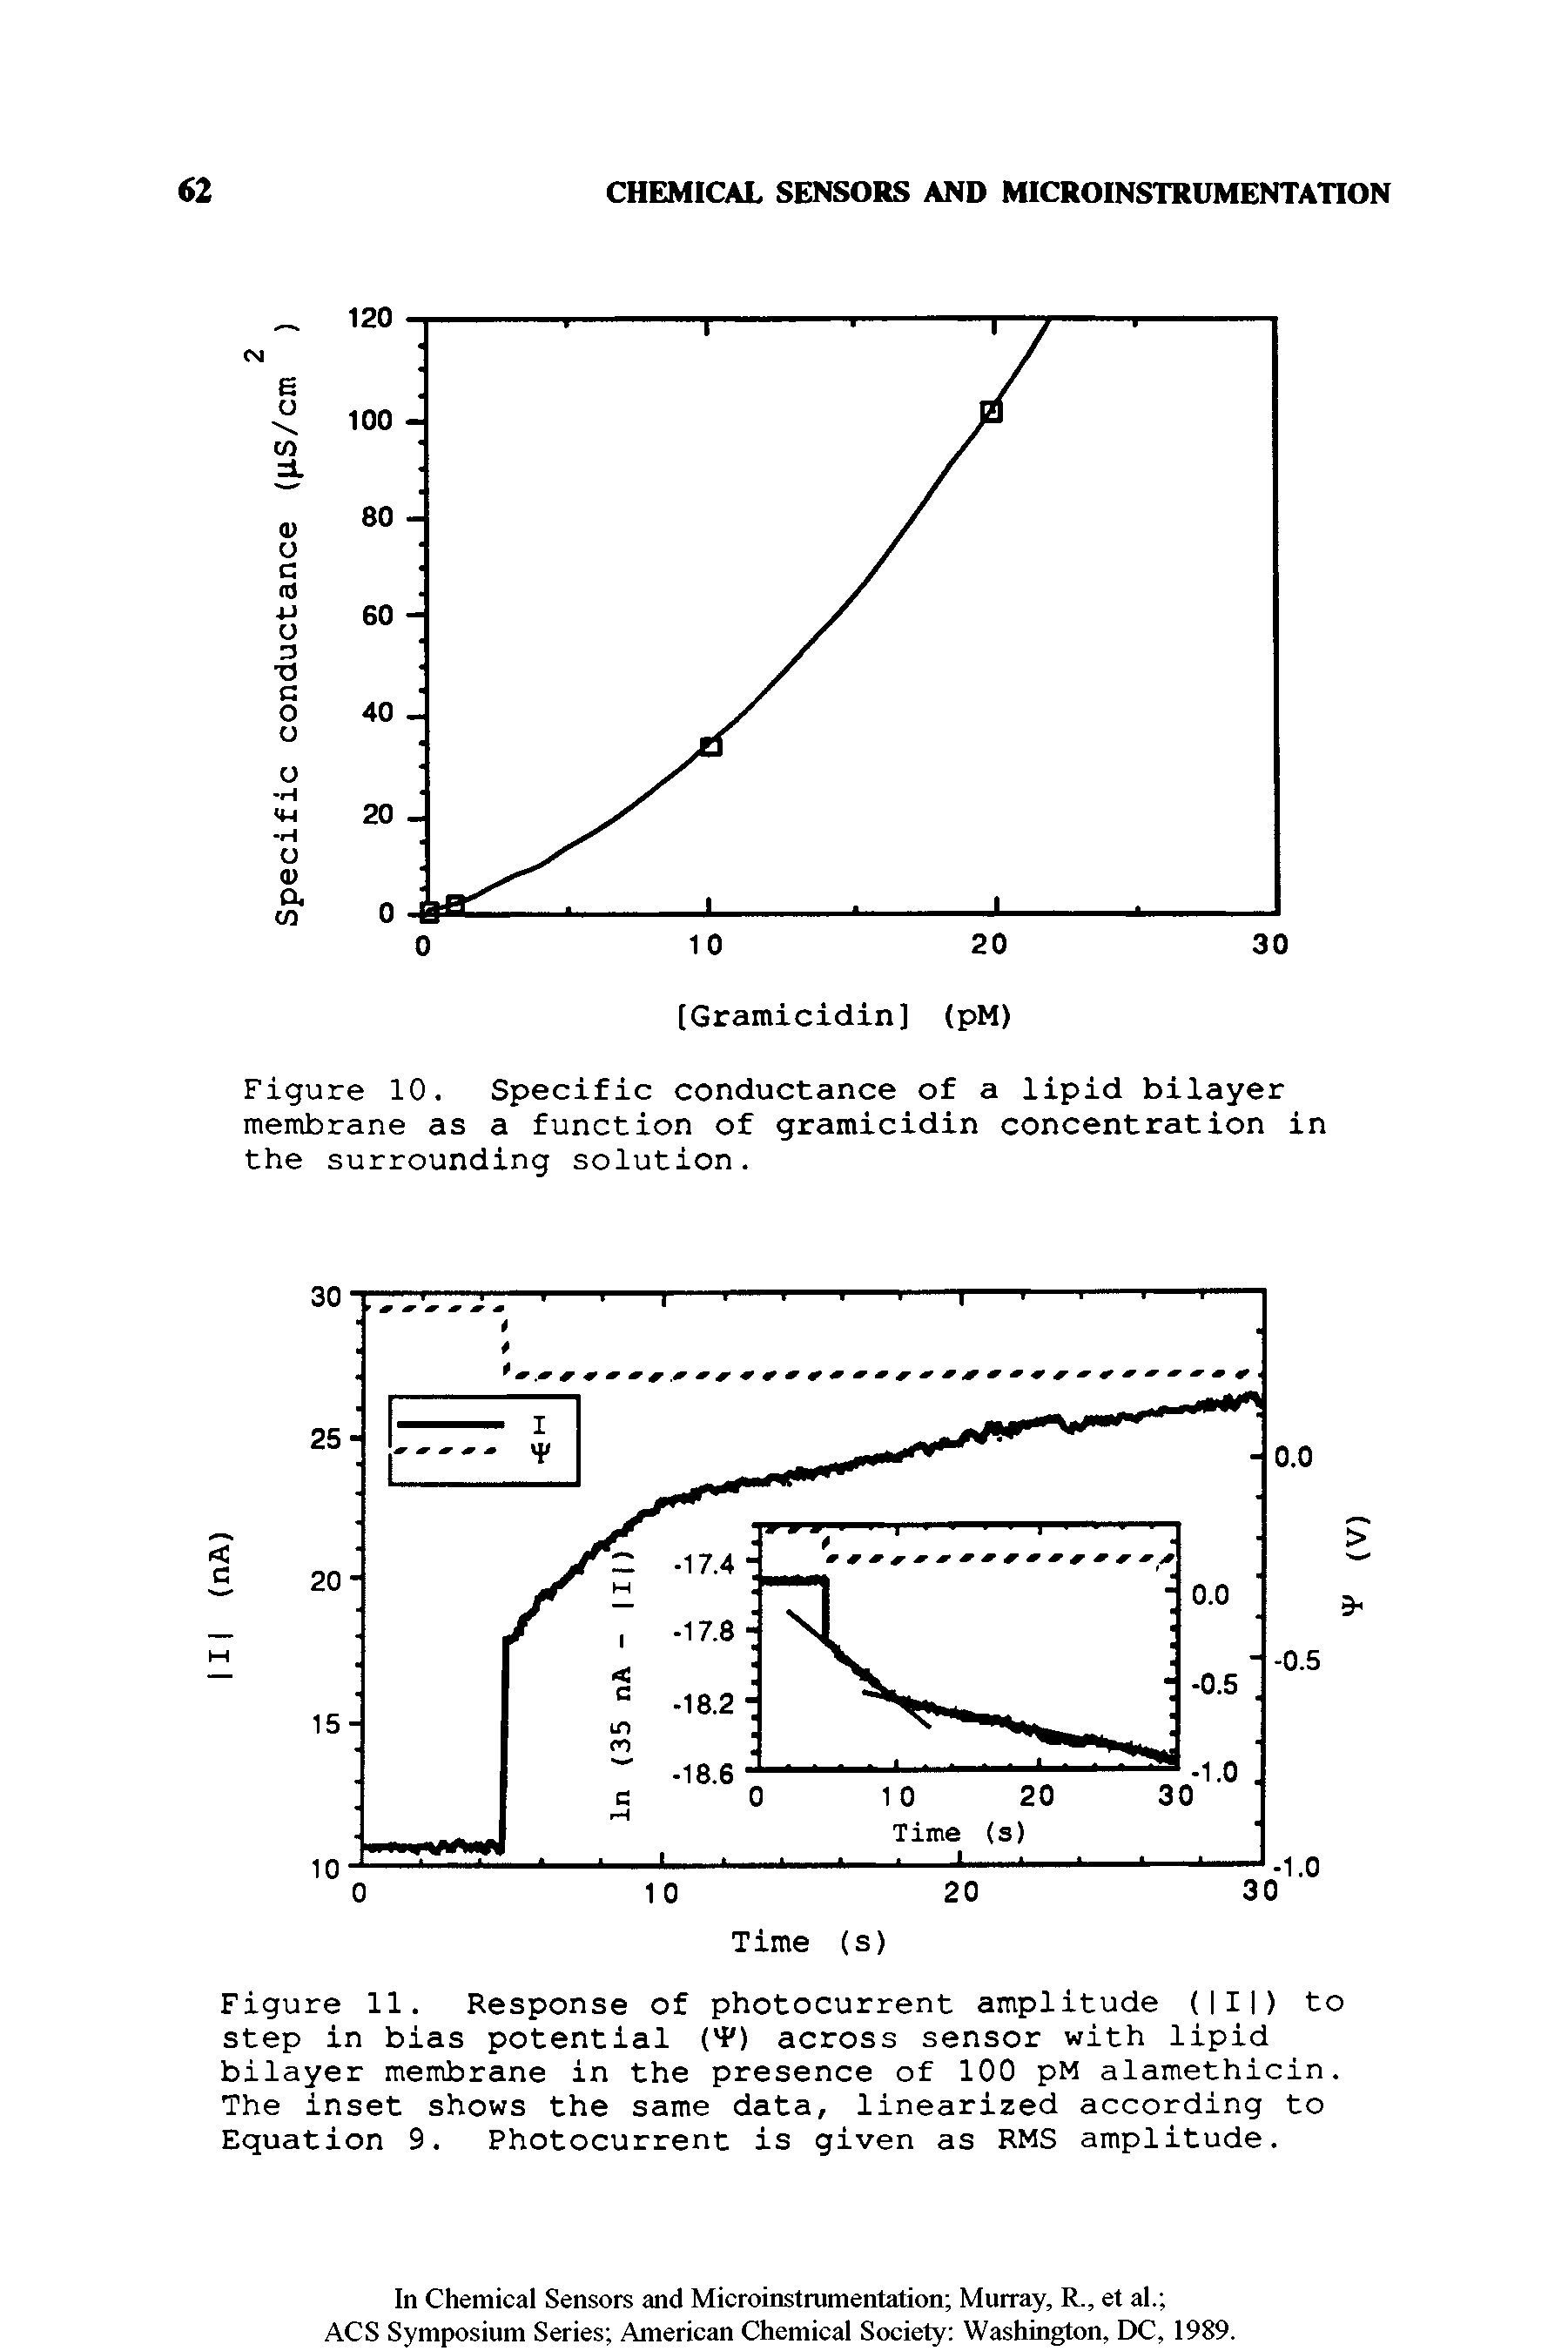 Figure 10. Specific conductance of a lipid bilayer membrane as a function of gramicidin concentration in the surrounding solution.